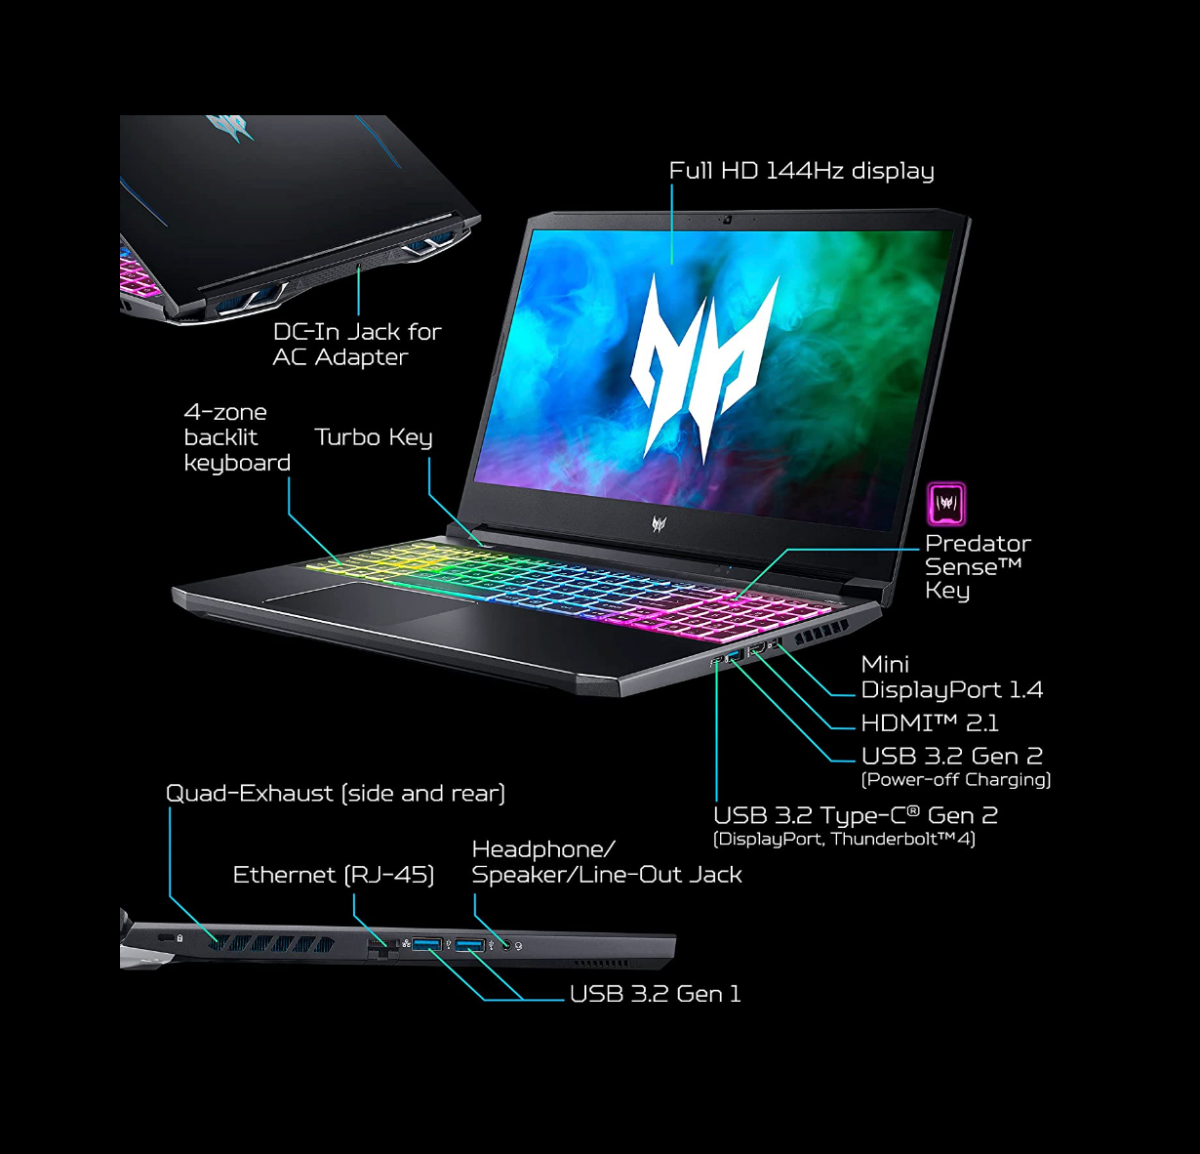 An Acer Predator Helios 300 laptop with information on its specs